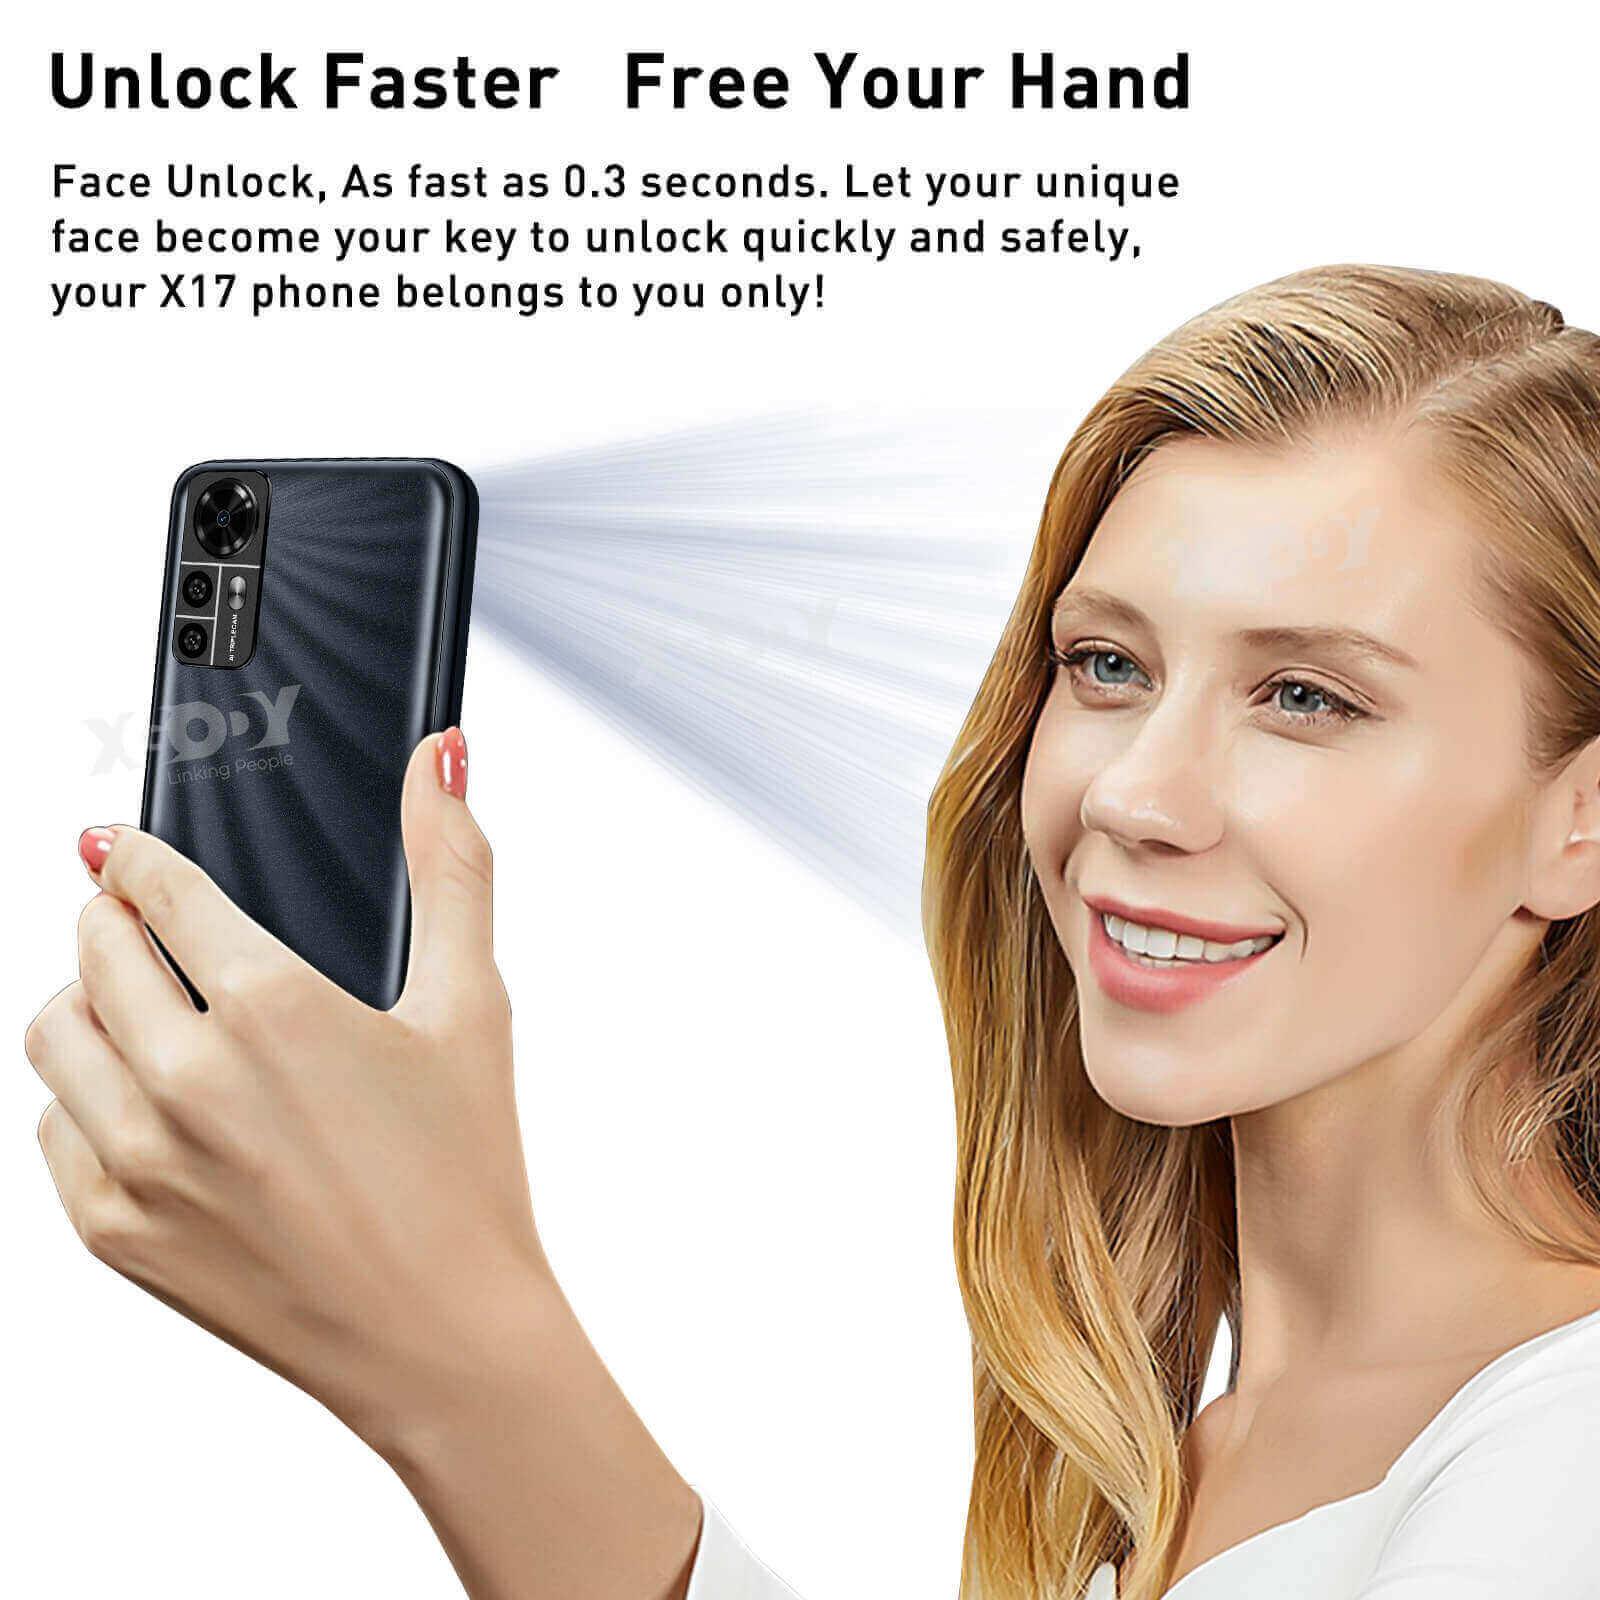 Cost-effective and Most worthwhile XGODY Android Phone X17 - Affordable 4G Smartphone with Dual SIM and Expandable Memory - XGODY 